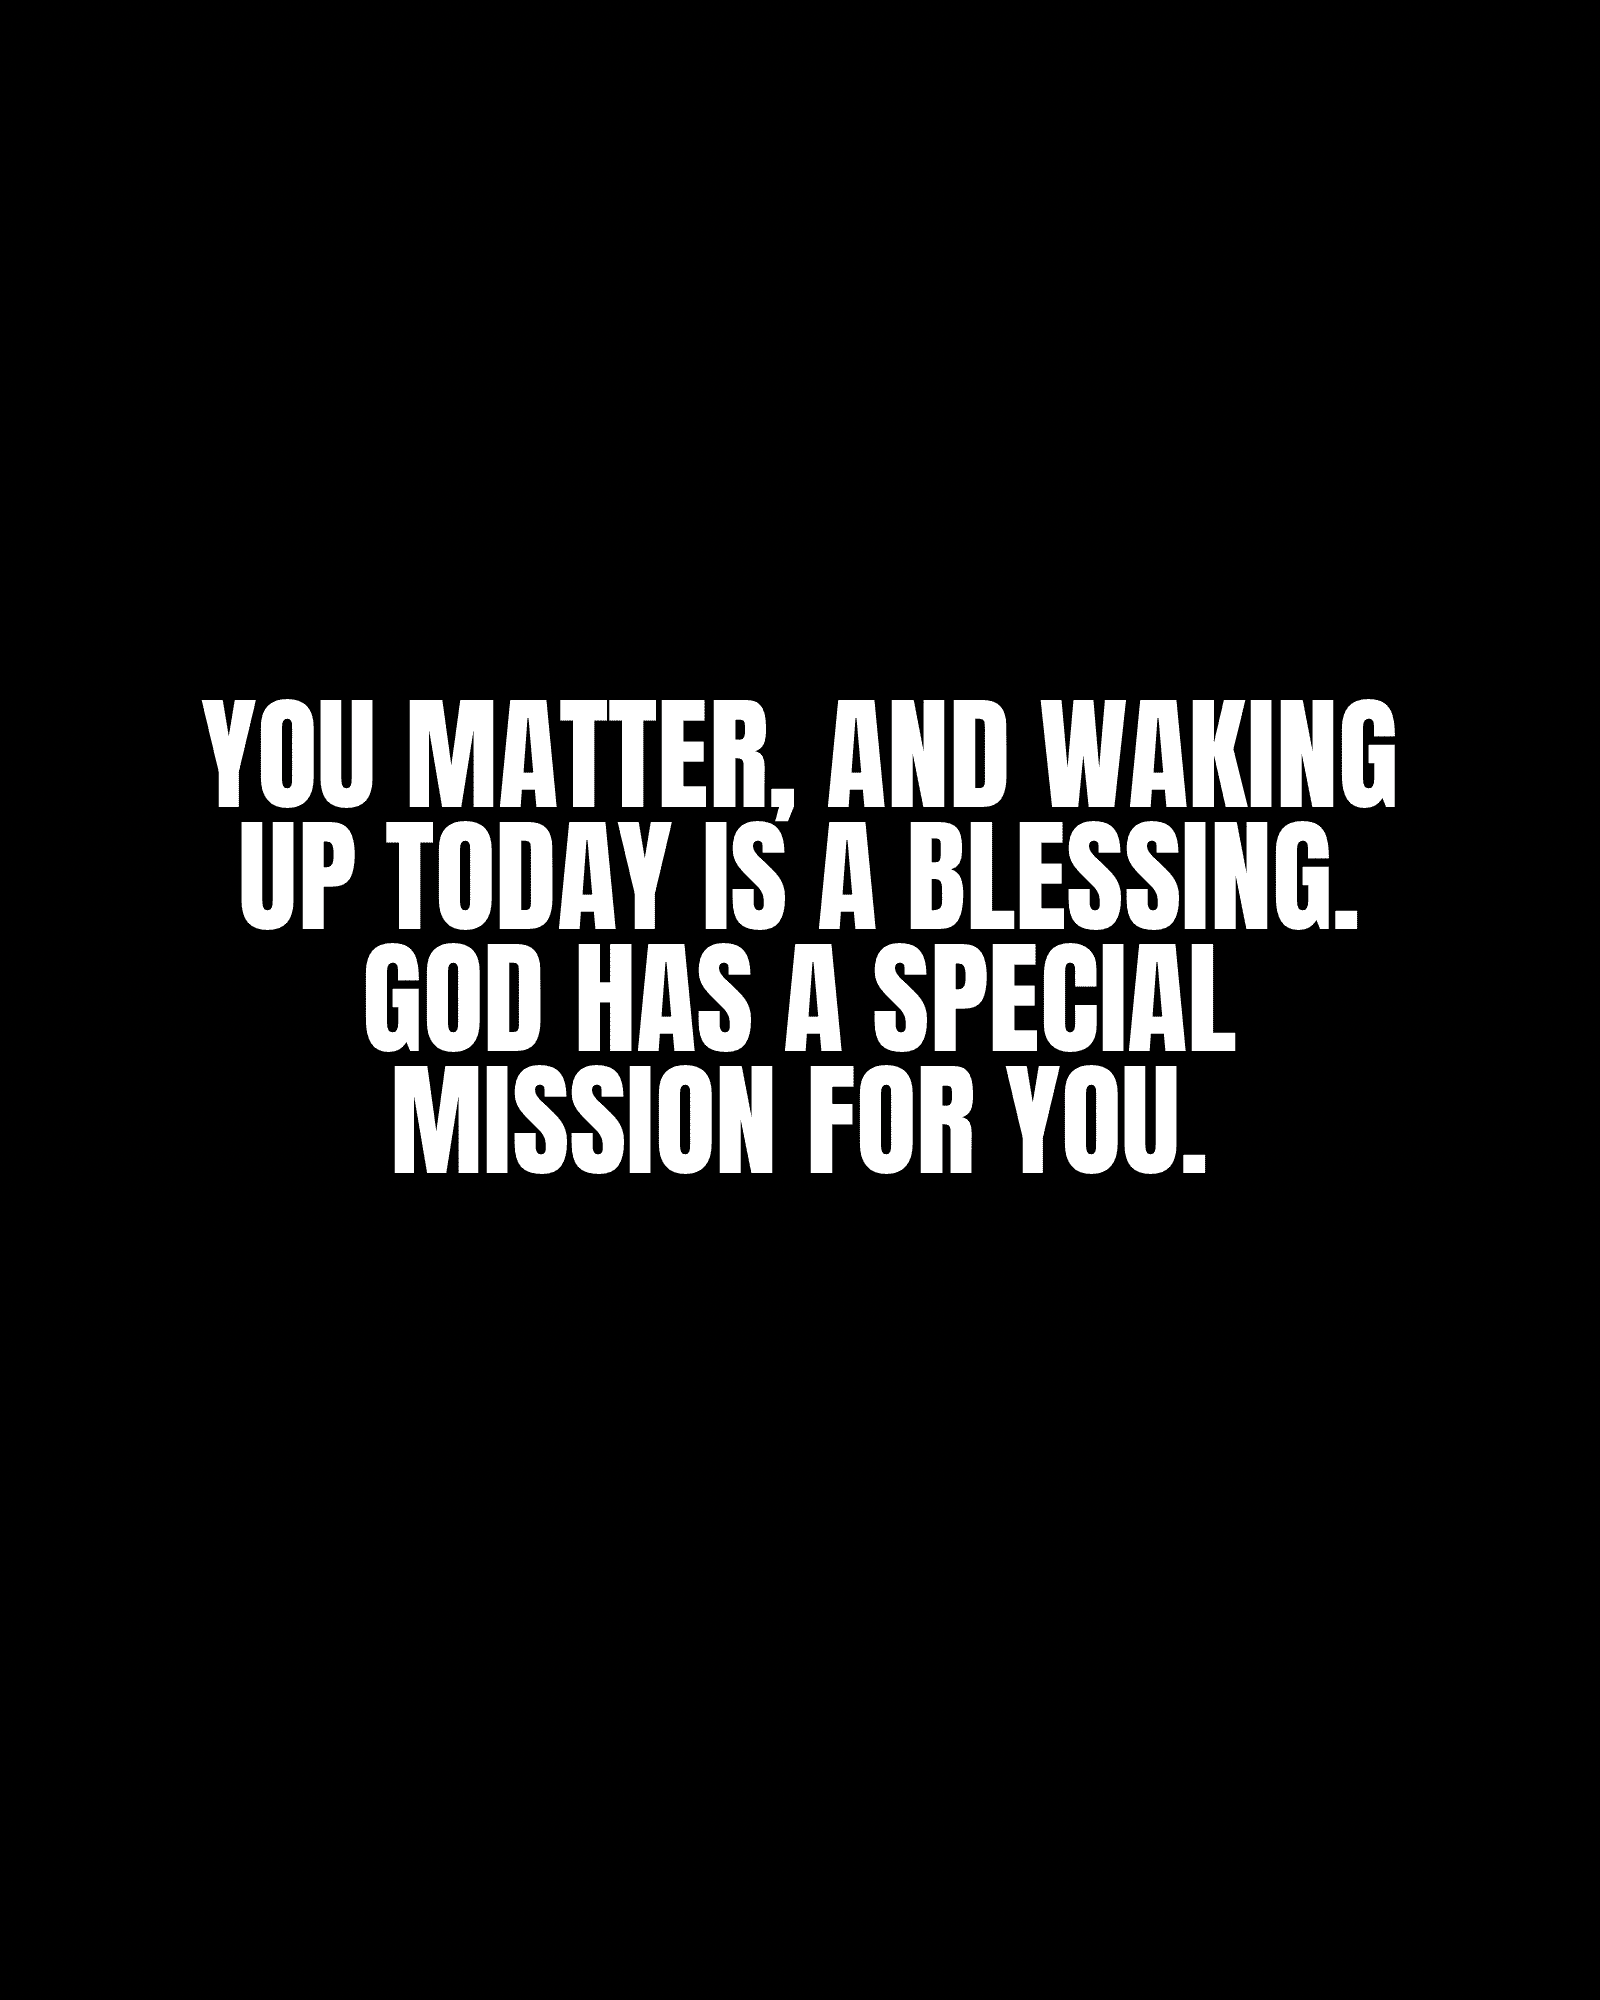 You matter, and waking up today is a blessing. God has a special mission for you.